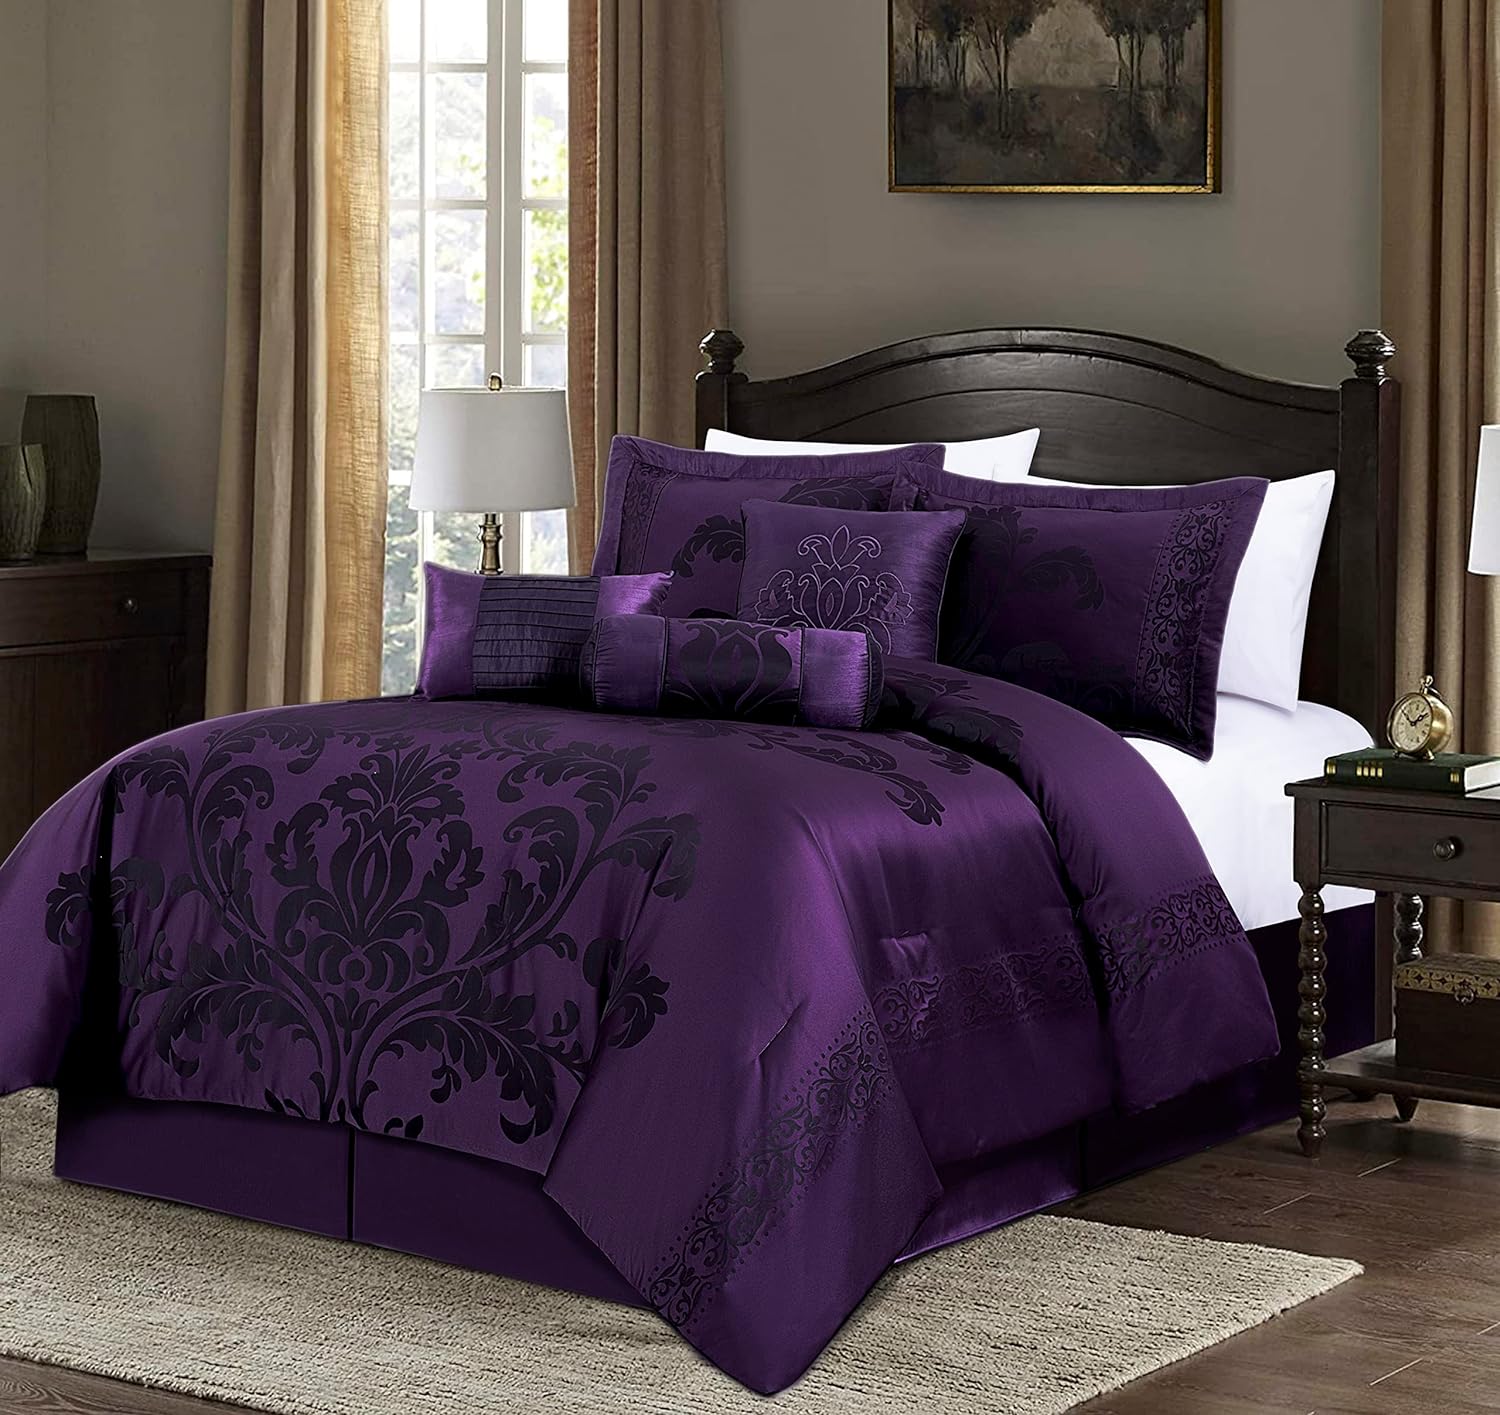 I love this bedspread. The color is exactly what I was looking for.And the price was outstanding. I have a queen bed but I bought a king size since it was half the price and it fits perfectly. The material is very soft. 